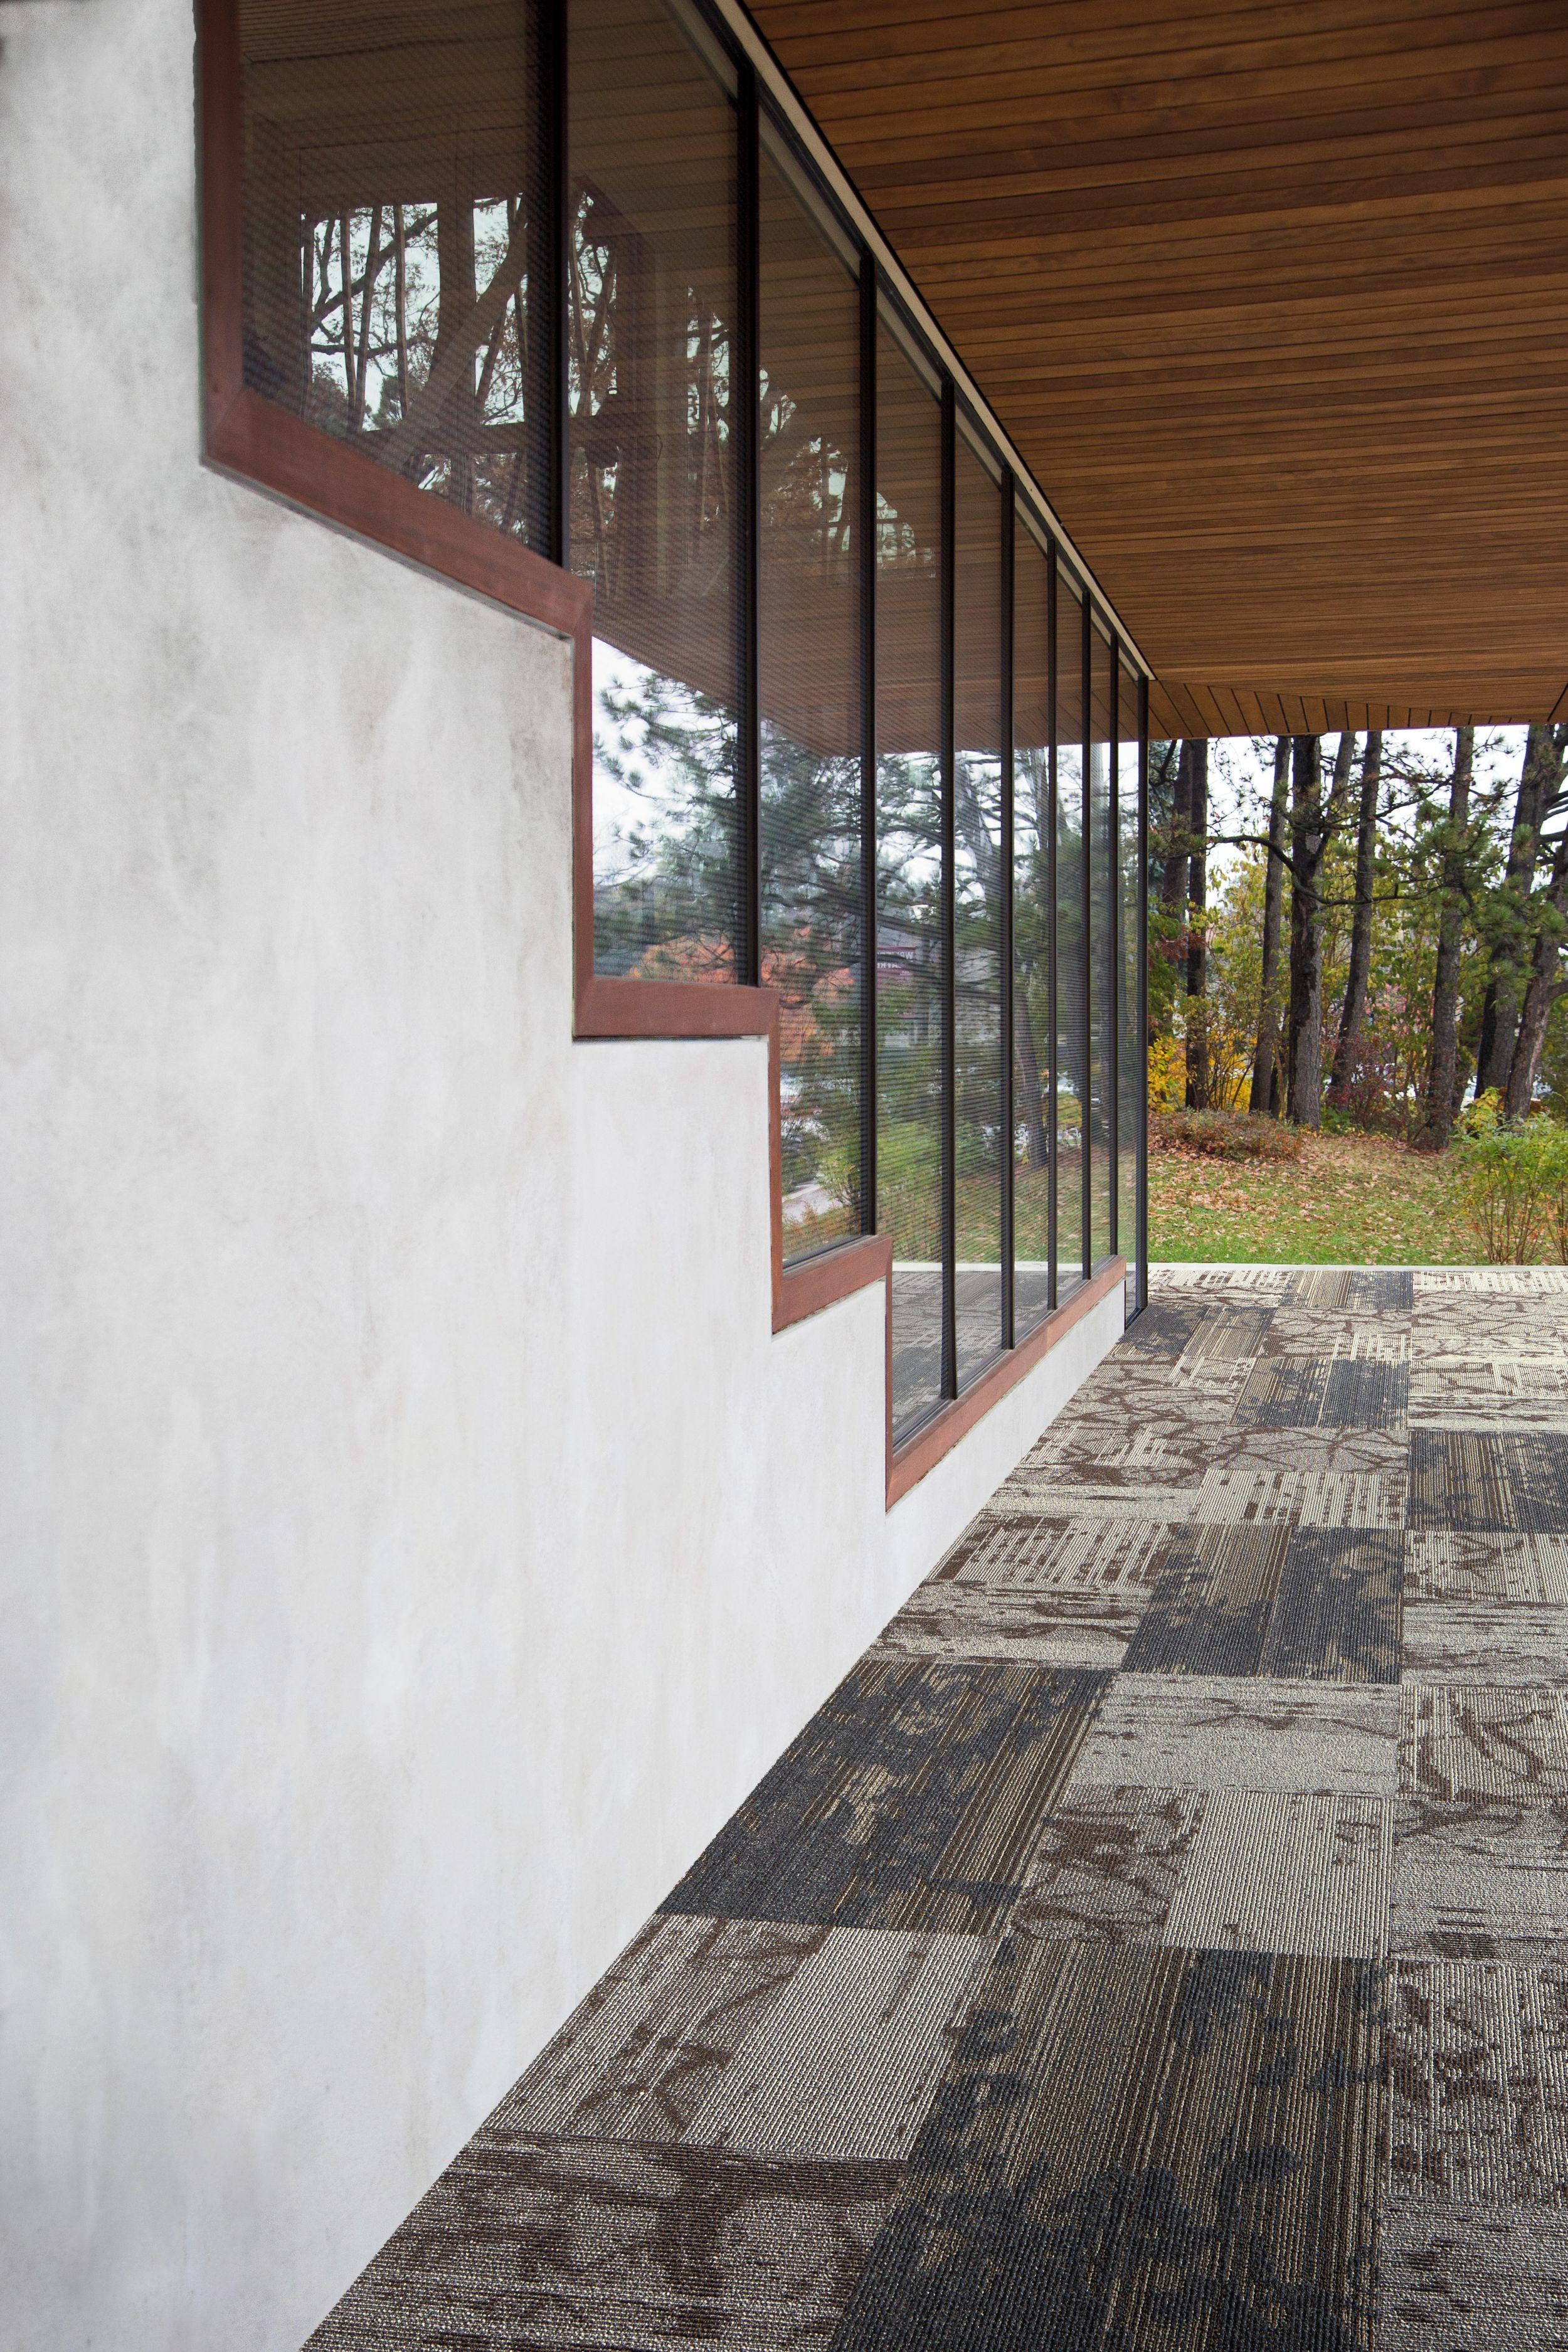 Interface Glazing and Ground plank carpet tile shown for inspiration in outdoor setting image number 10